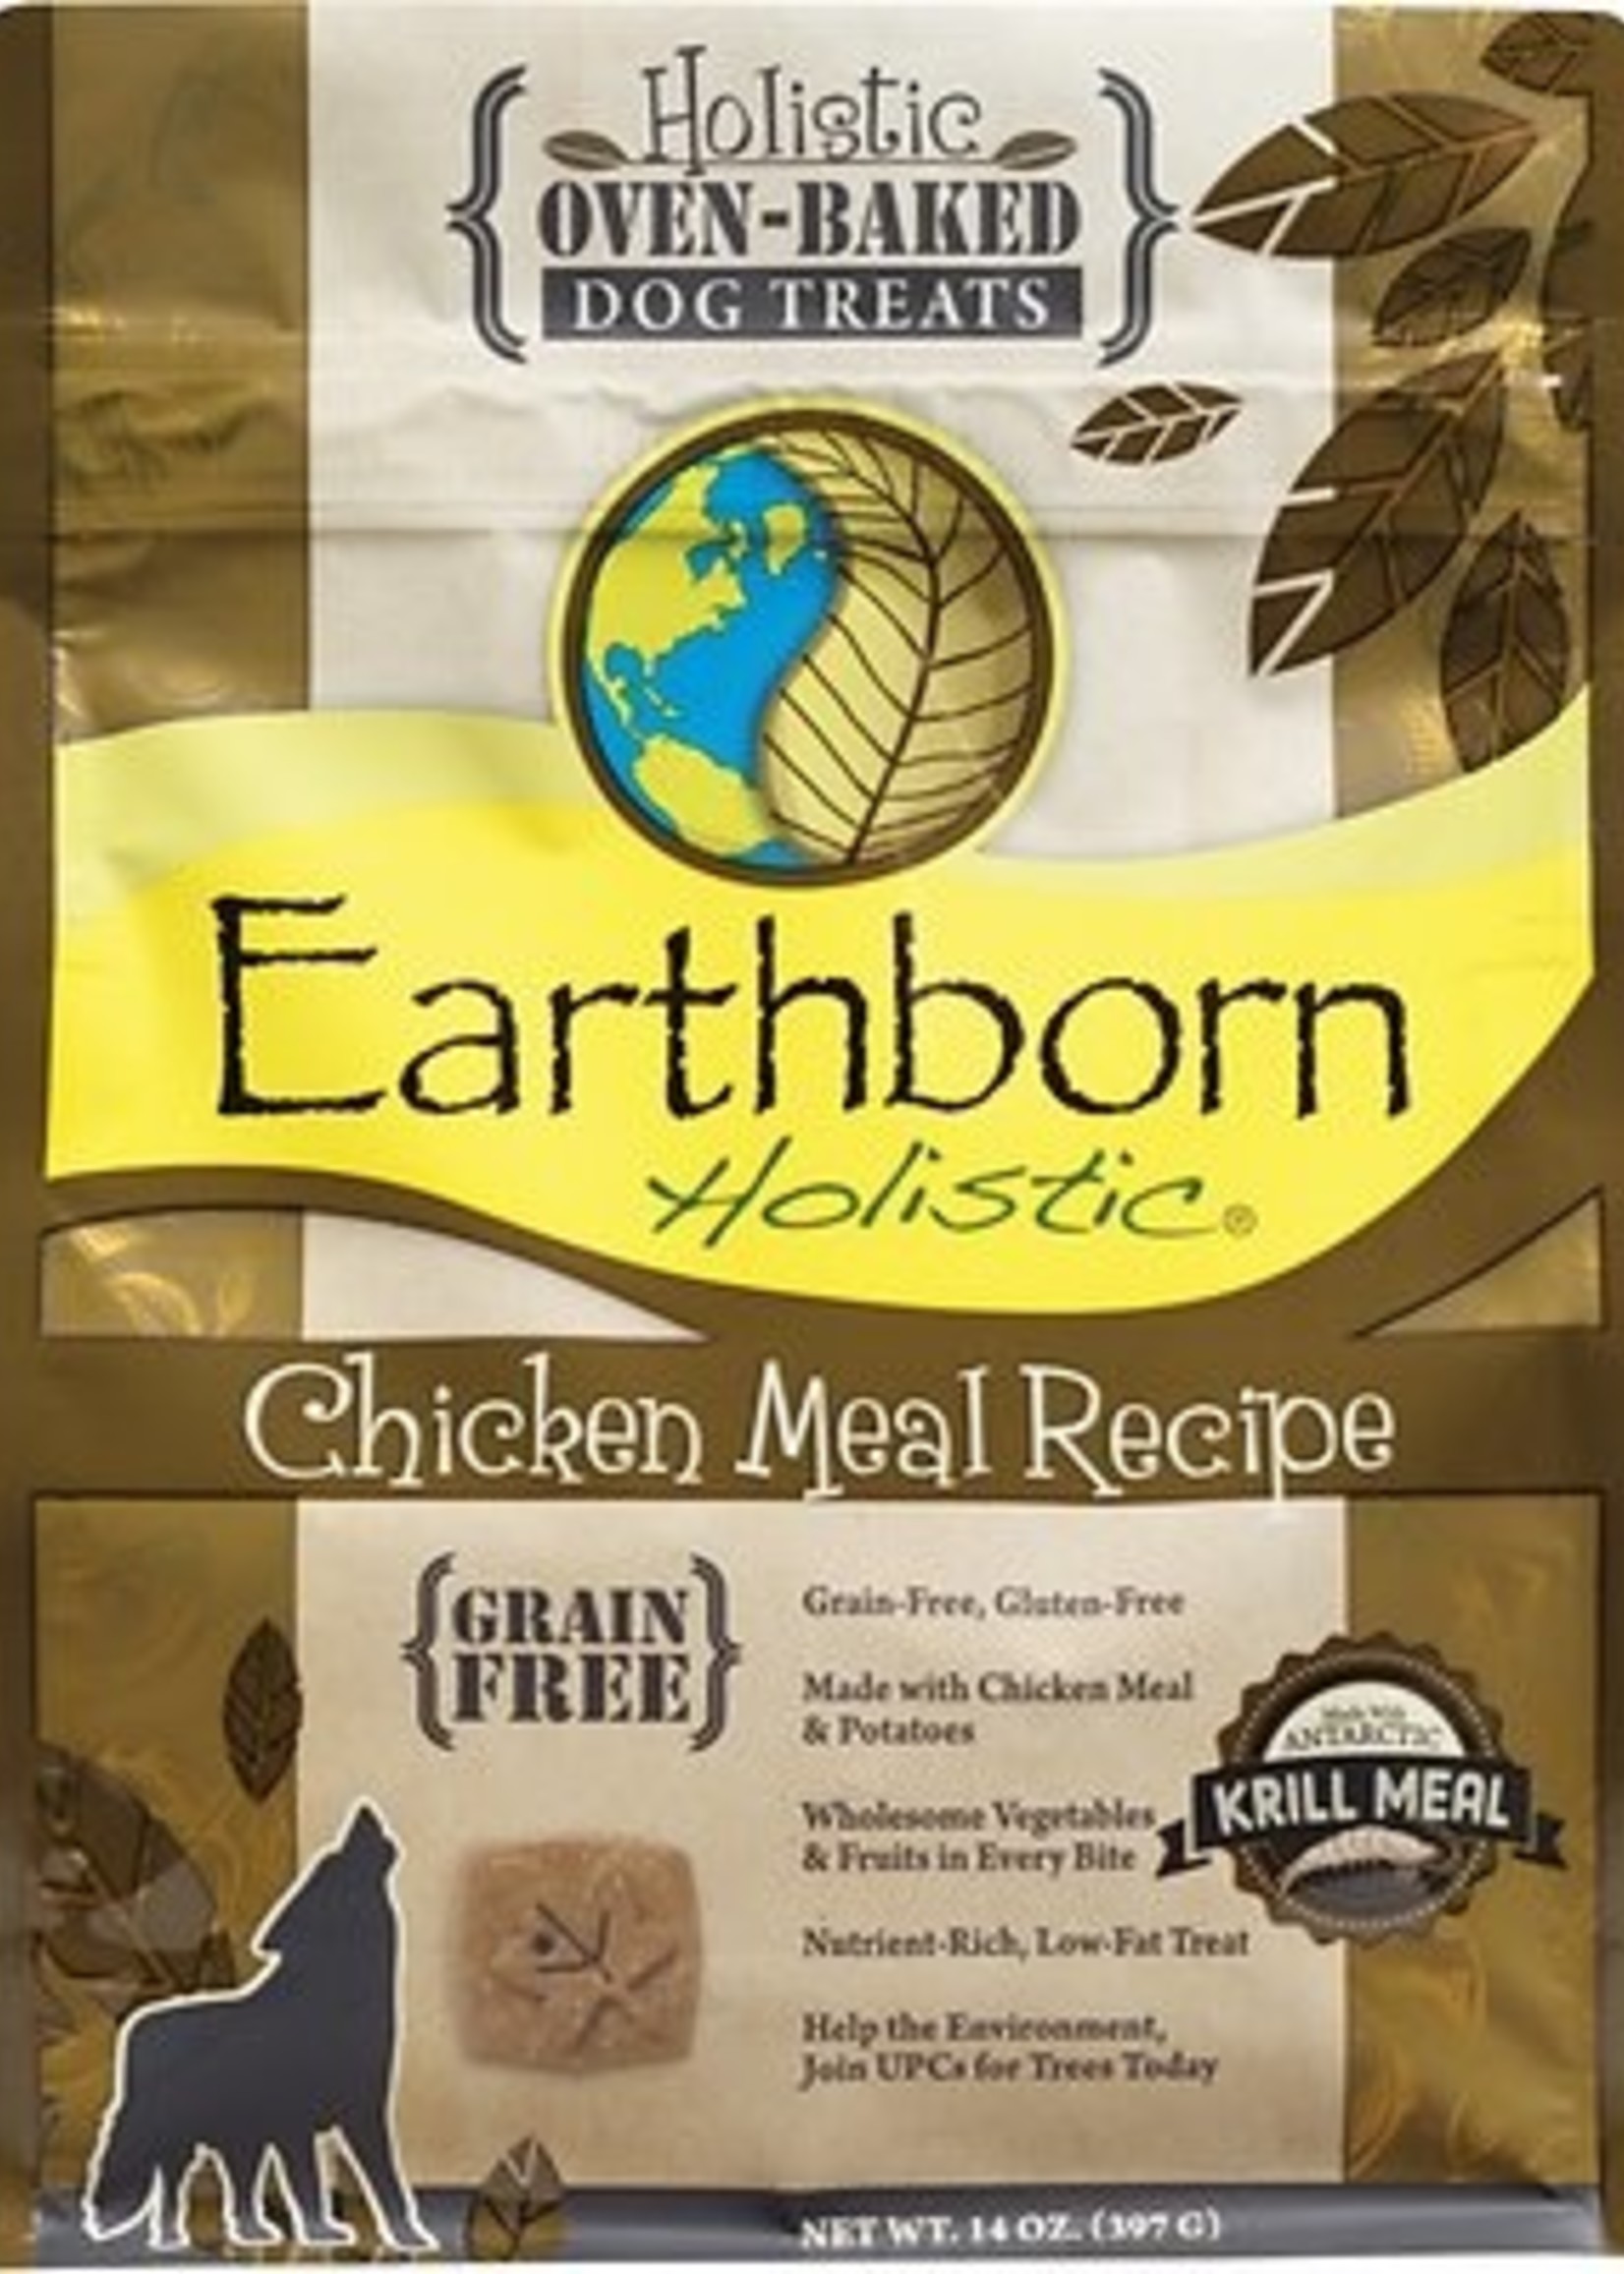 Midwestern Pet Earthborn Chicken Biscuit 14 oz